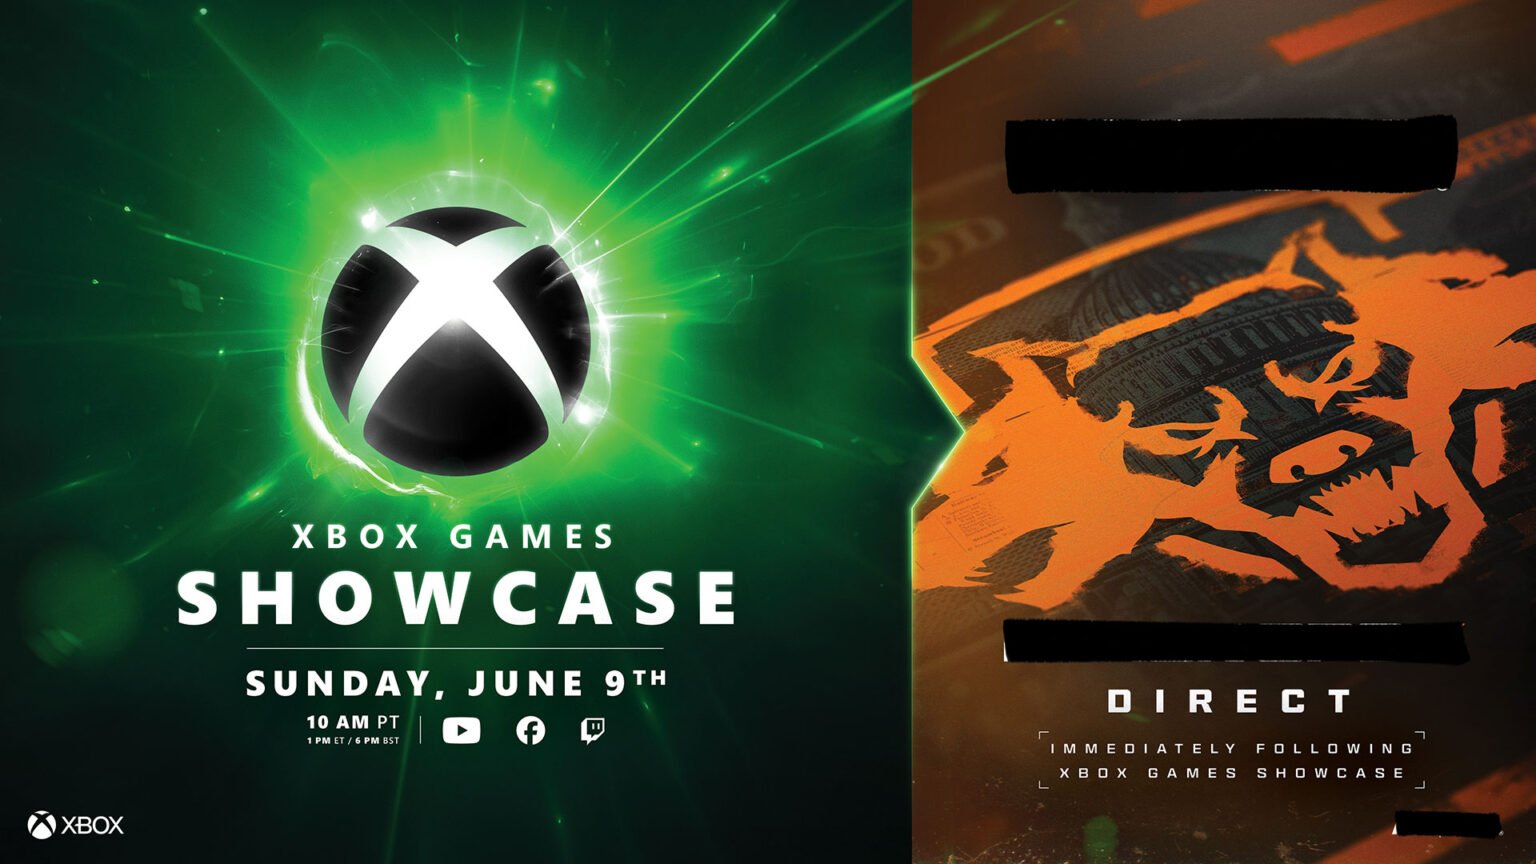 Xbox Games Showcase and “Redacted” Direct announced for June 9